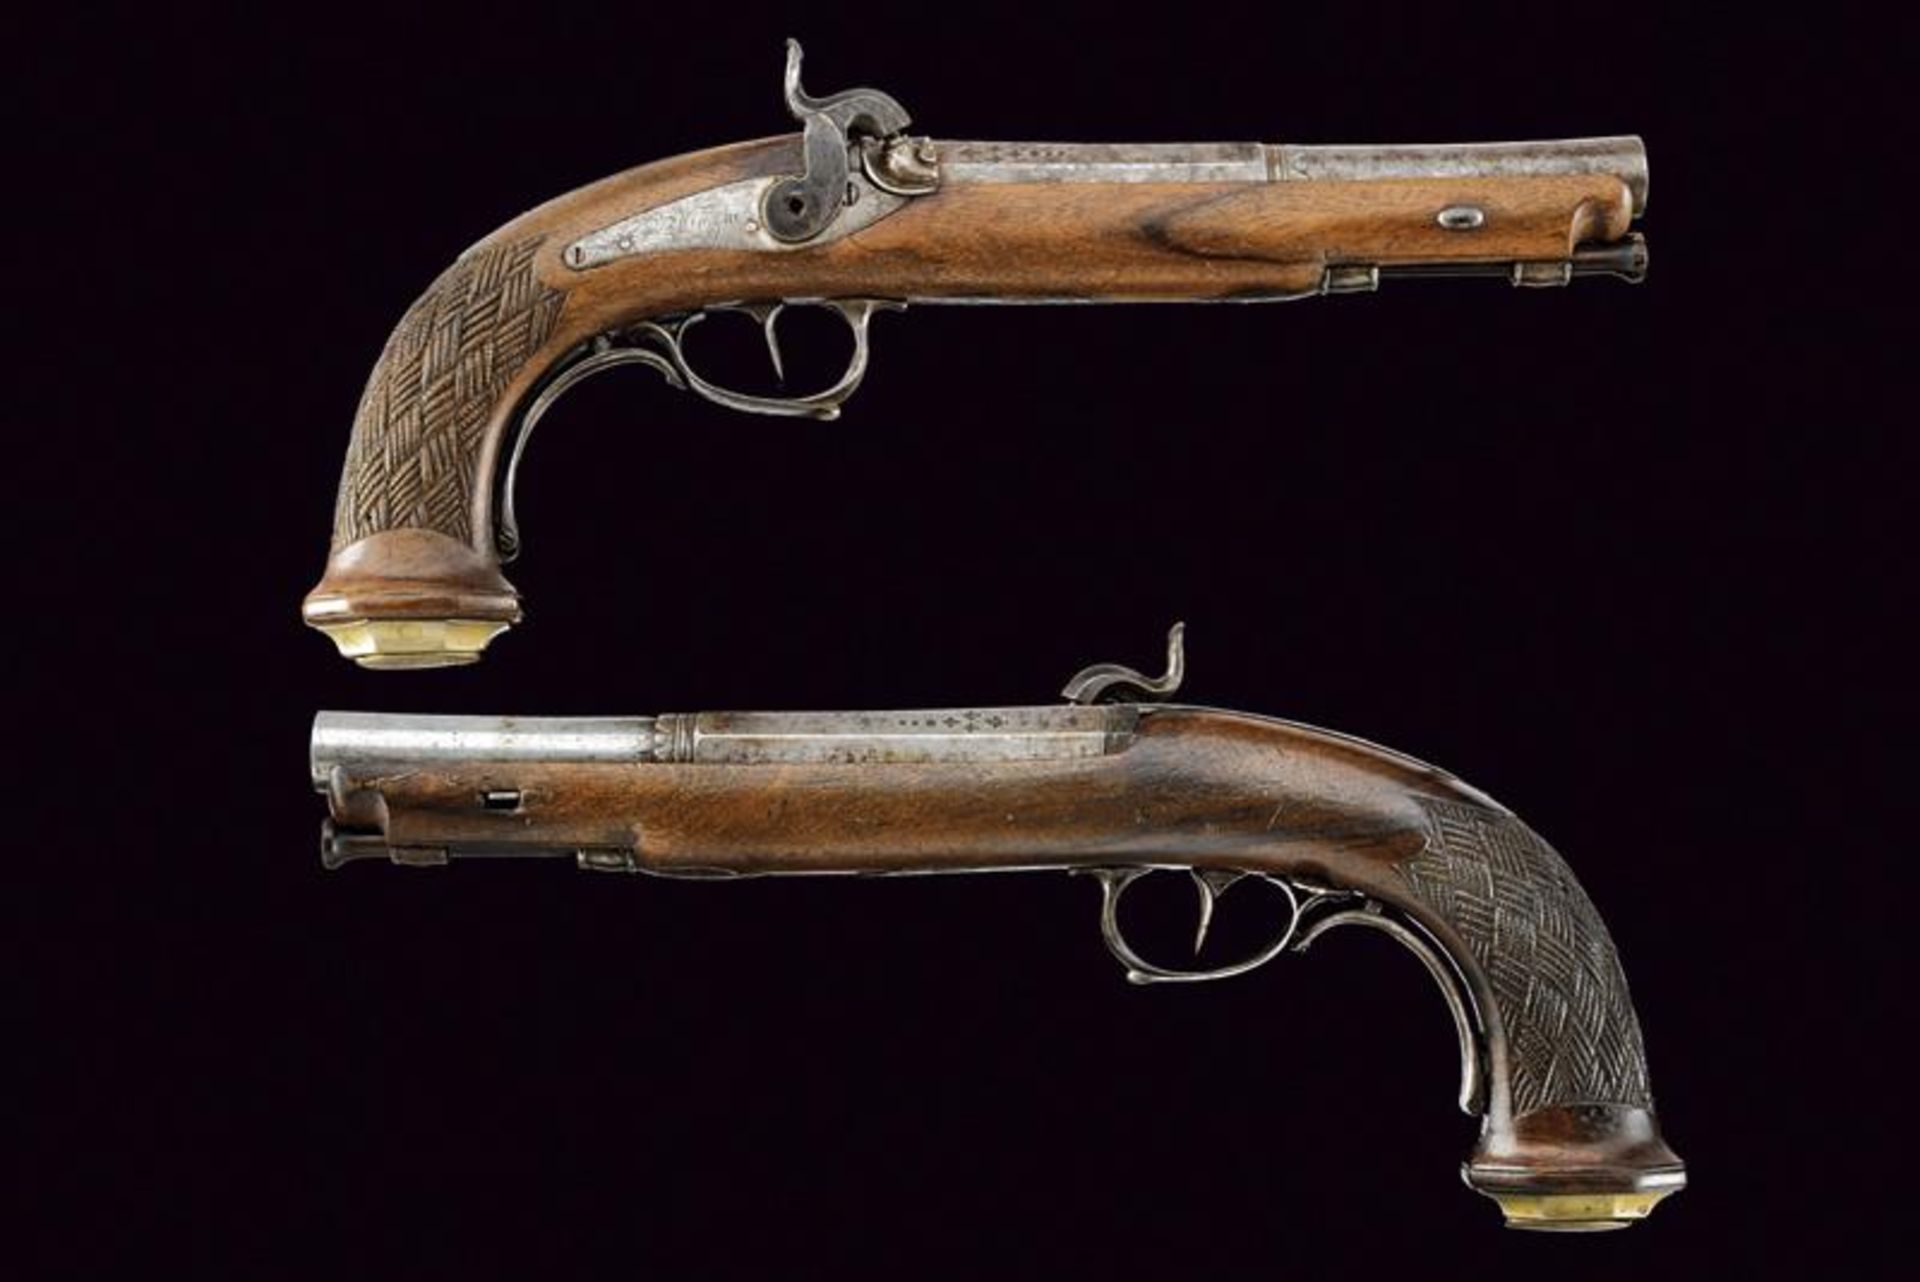 An interesting pair of percussion pistols by V. Ciampa, with safety lock